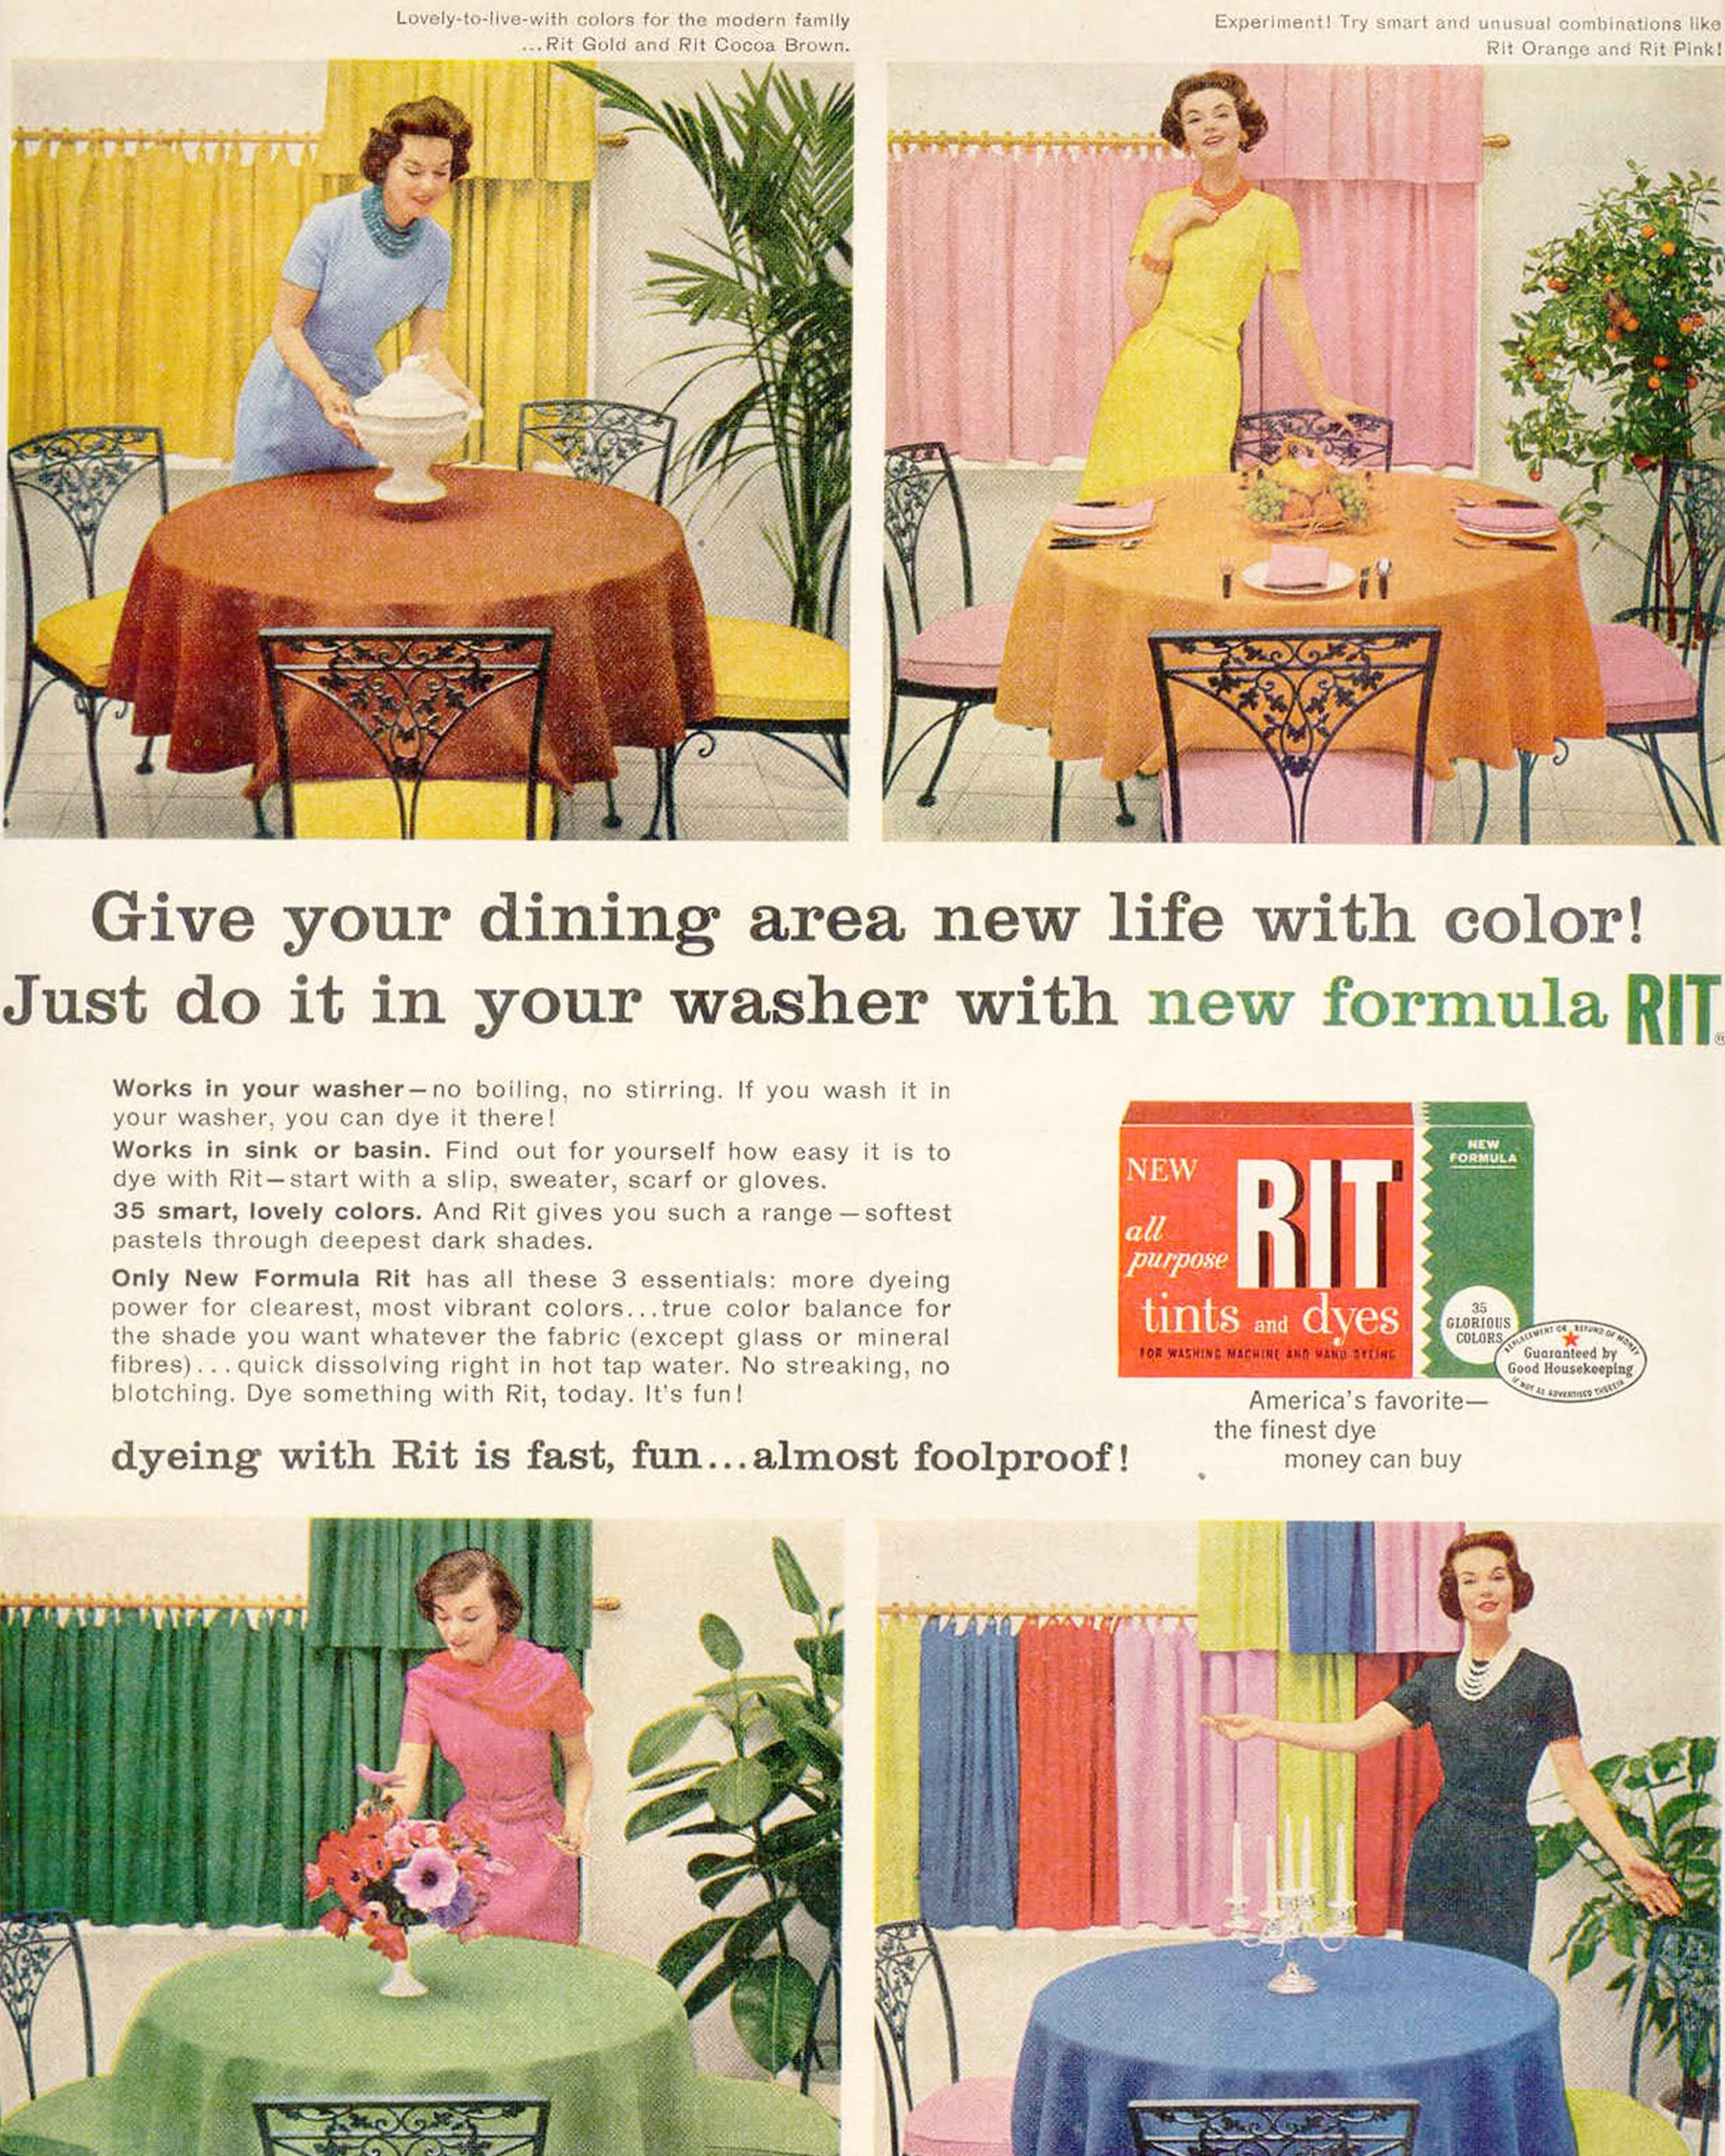 Vintage Rit ad, "give your dining area new life with color!"